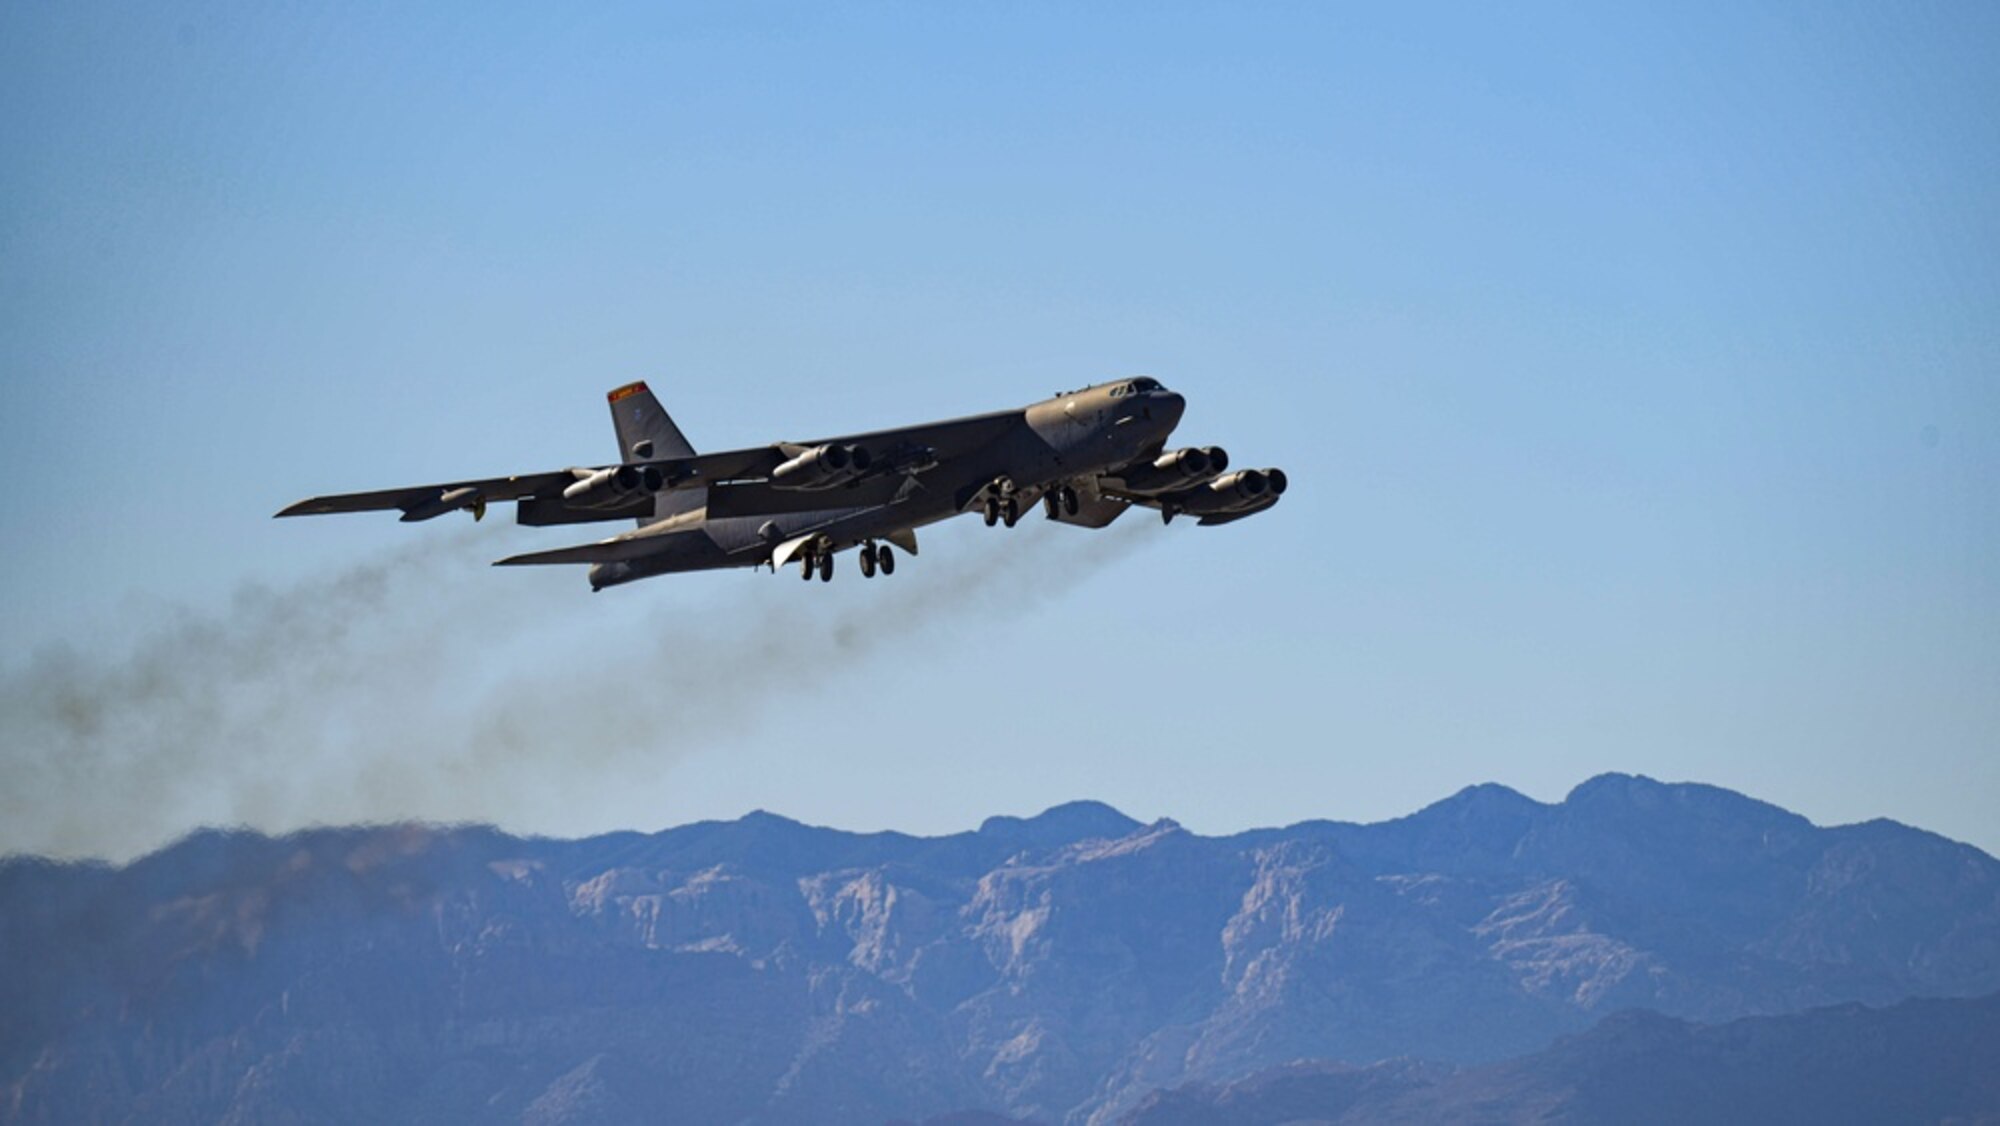 A Minot Air Force Base 5th Bomb Wing B-52H Stratofortress takes off during Red Flag-Nellis 22-1 on Jan. 25, 2022, at Nellis Air Force Base, Nevada. This iteration of Red Flag is focused on confidence under fire, integrated leadership and the warfighter culture. (U.S. Air Force photo by Senior Airman Michael A. Richmond)